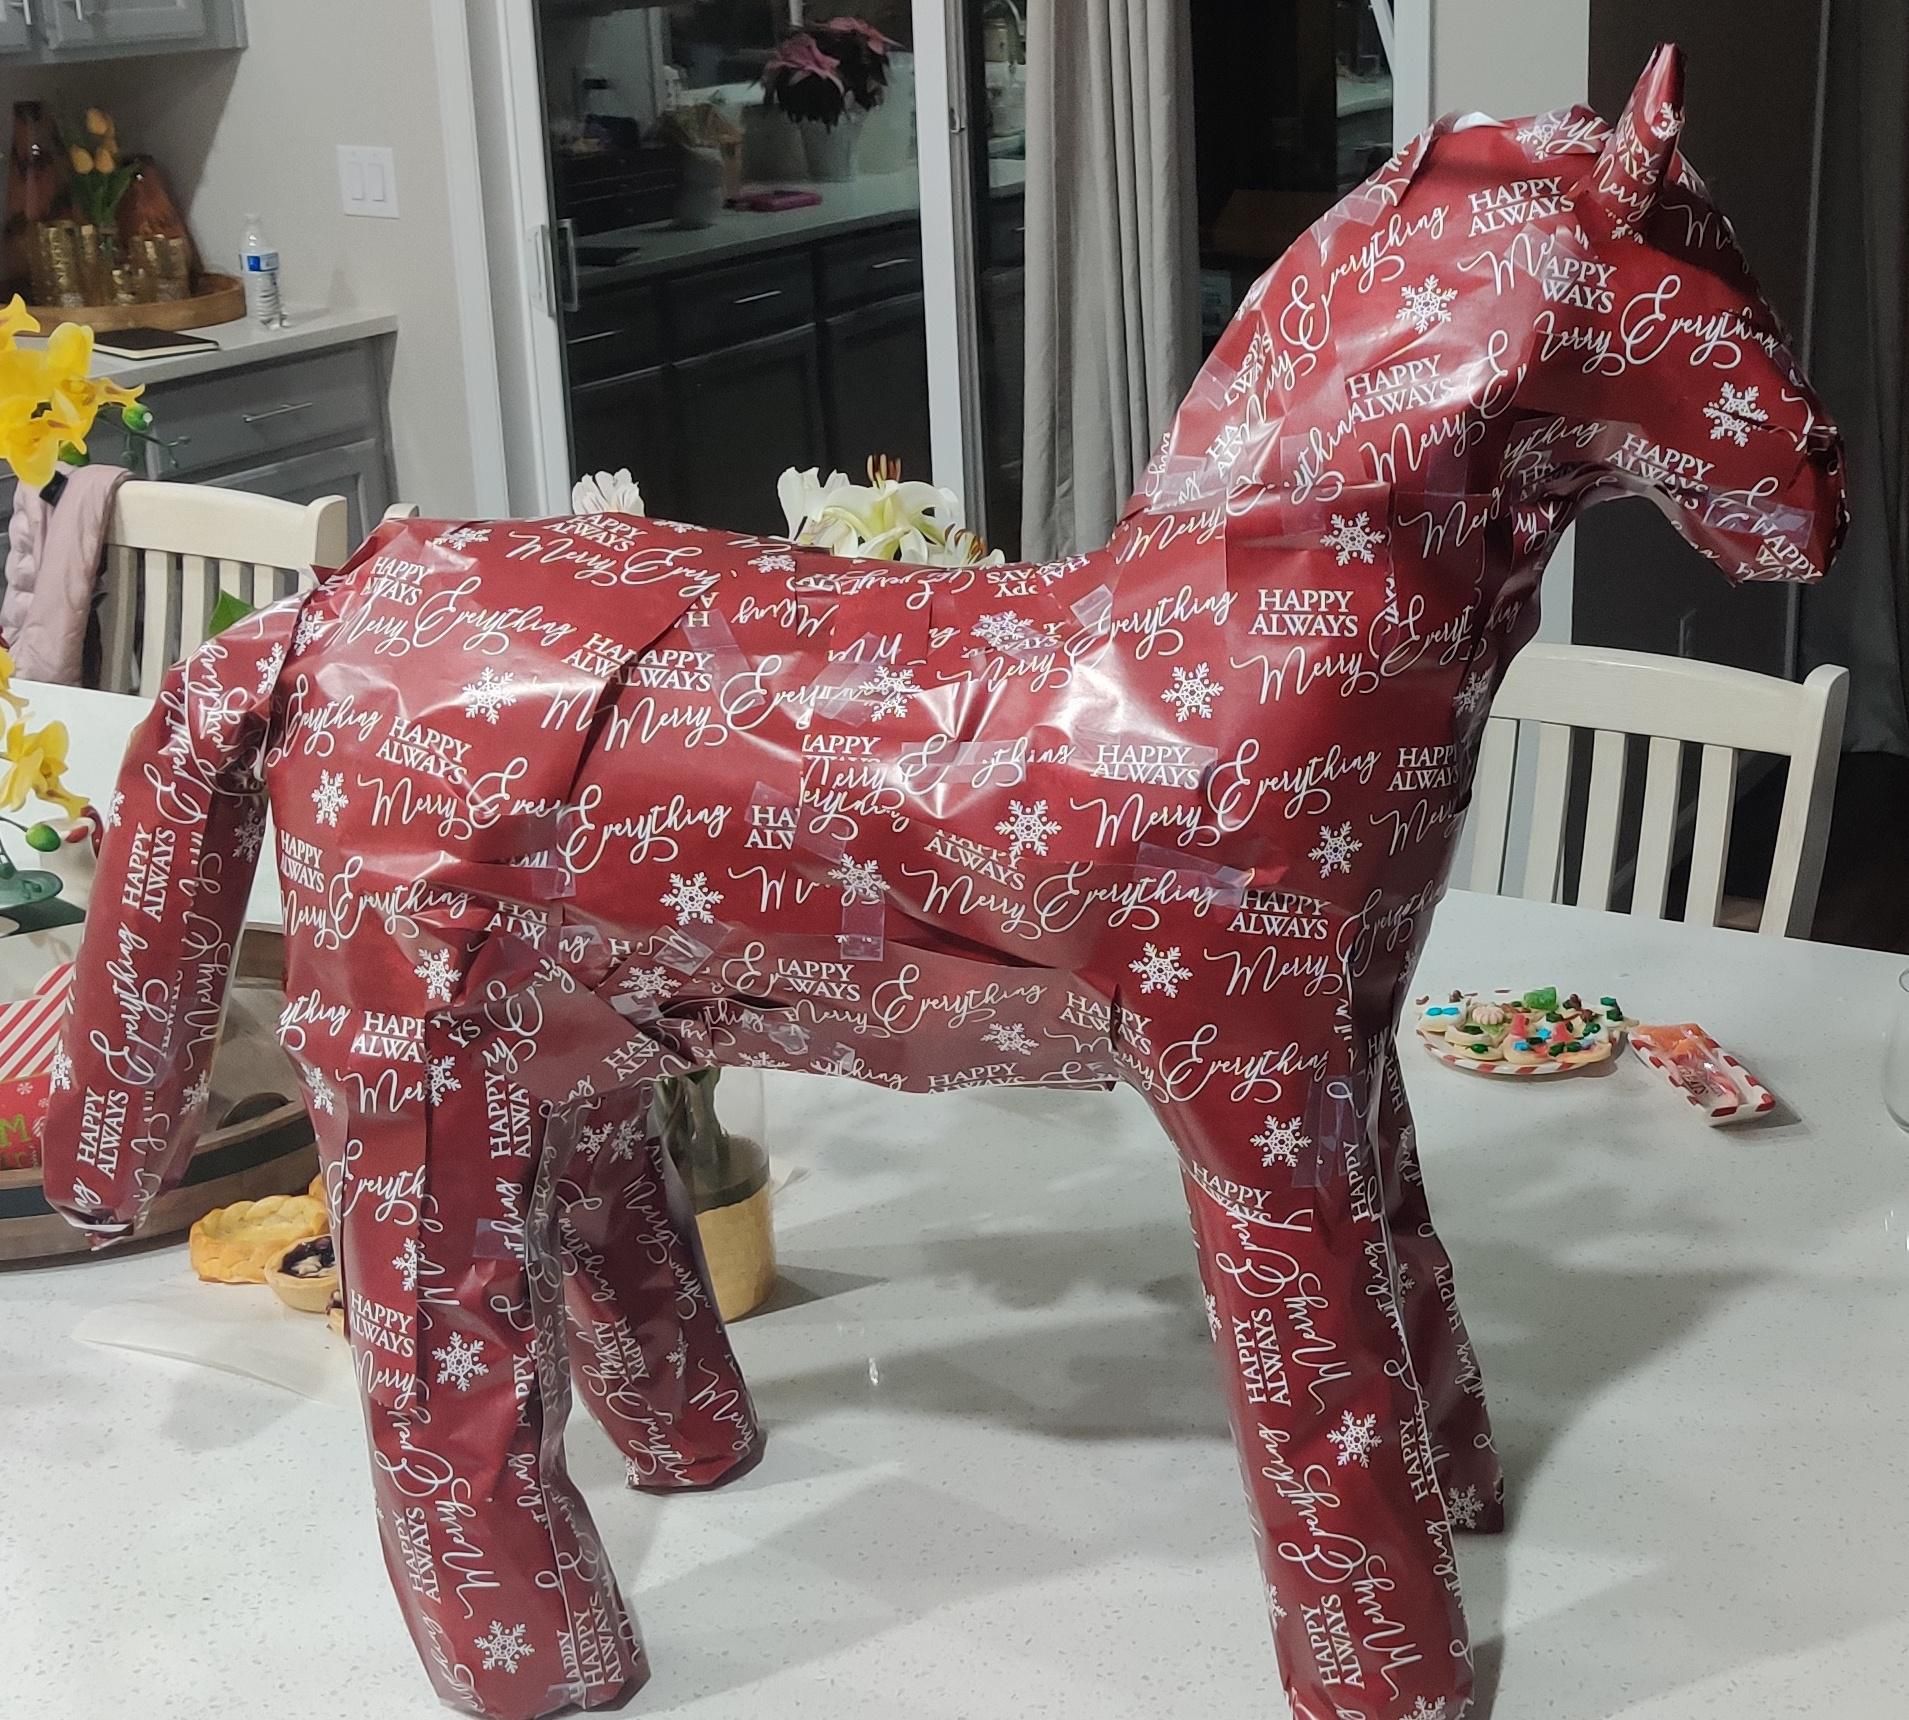 My daughter is obsessed with horses, but I obviously can't afford to buy her one. Bought her a gift card for riding lessons and wrapped it like this